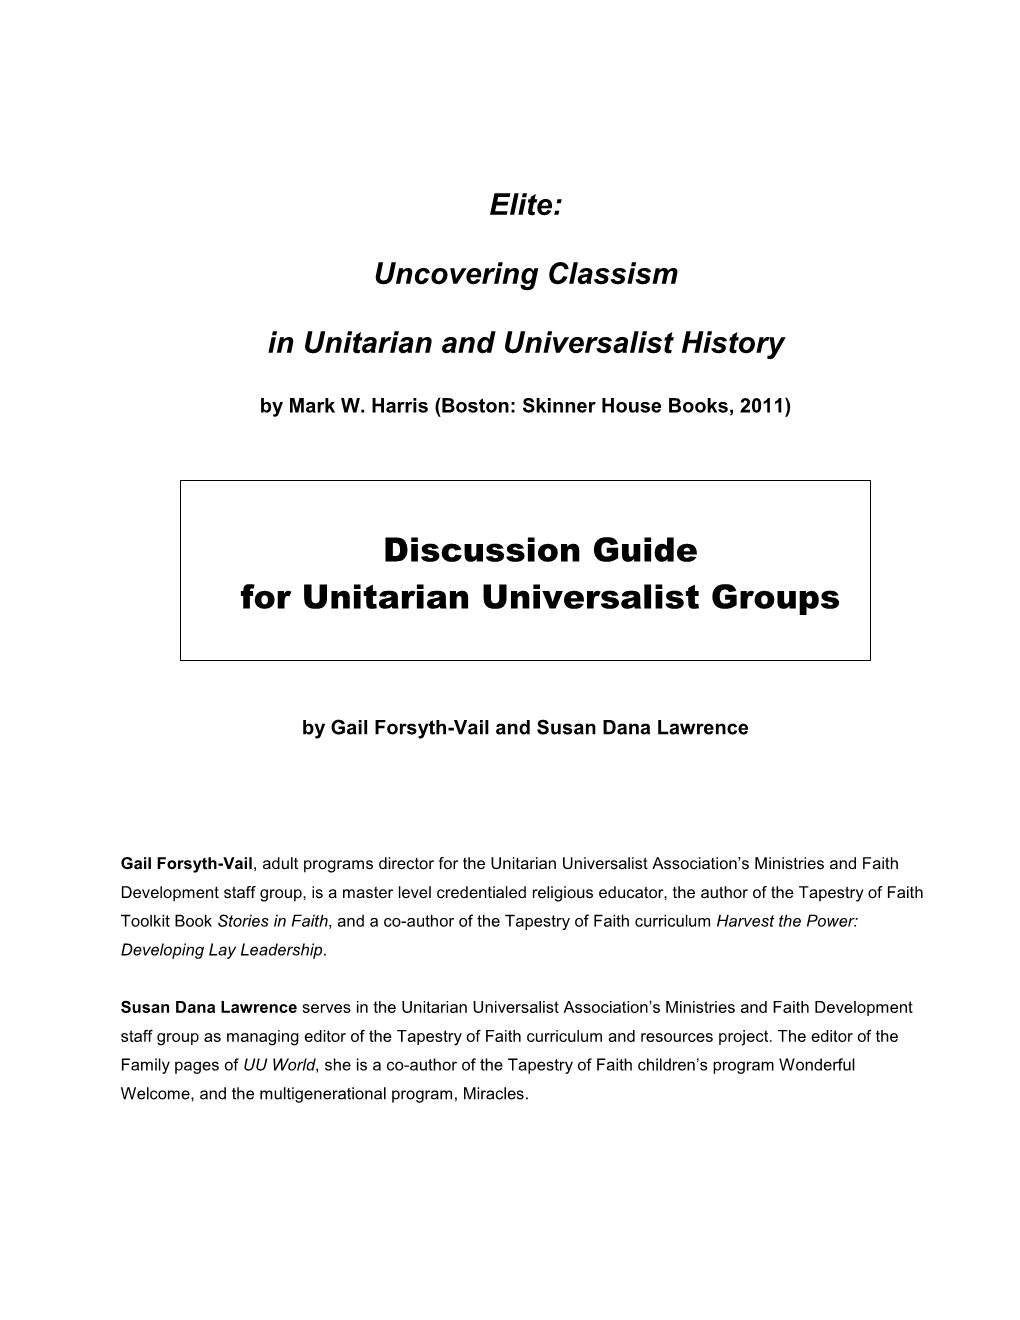 Elite: Uncovering Classism in Unitarian Universalist History (Skinner House Books, 2011), by the Reverend Mark W